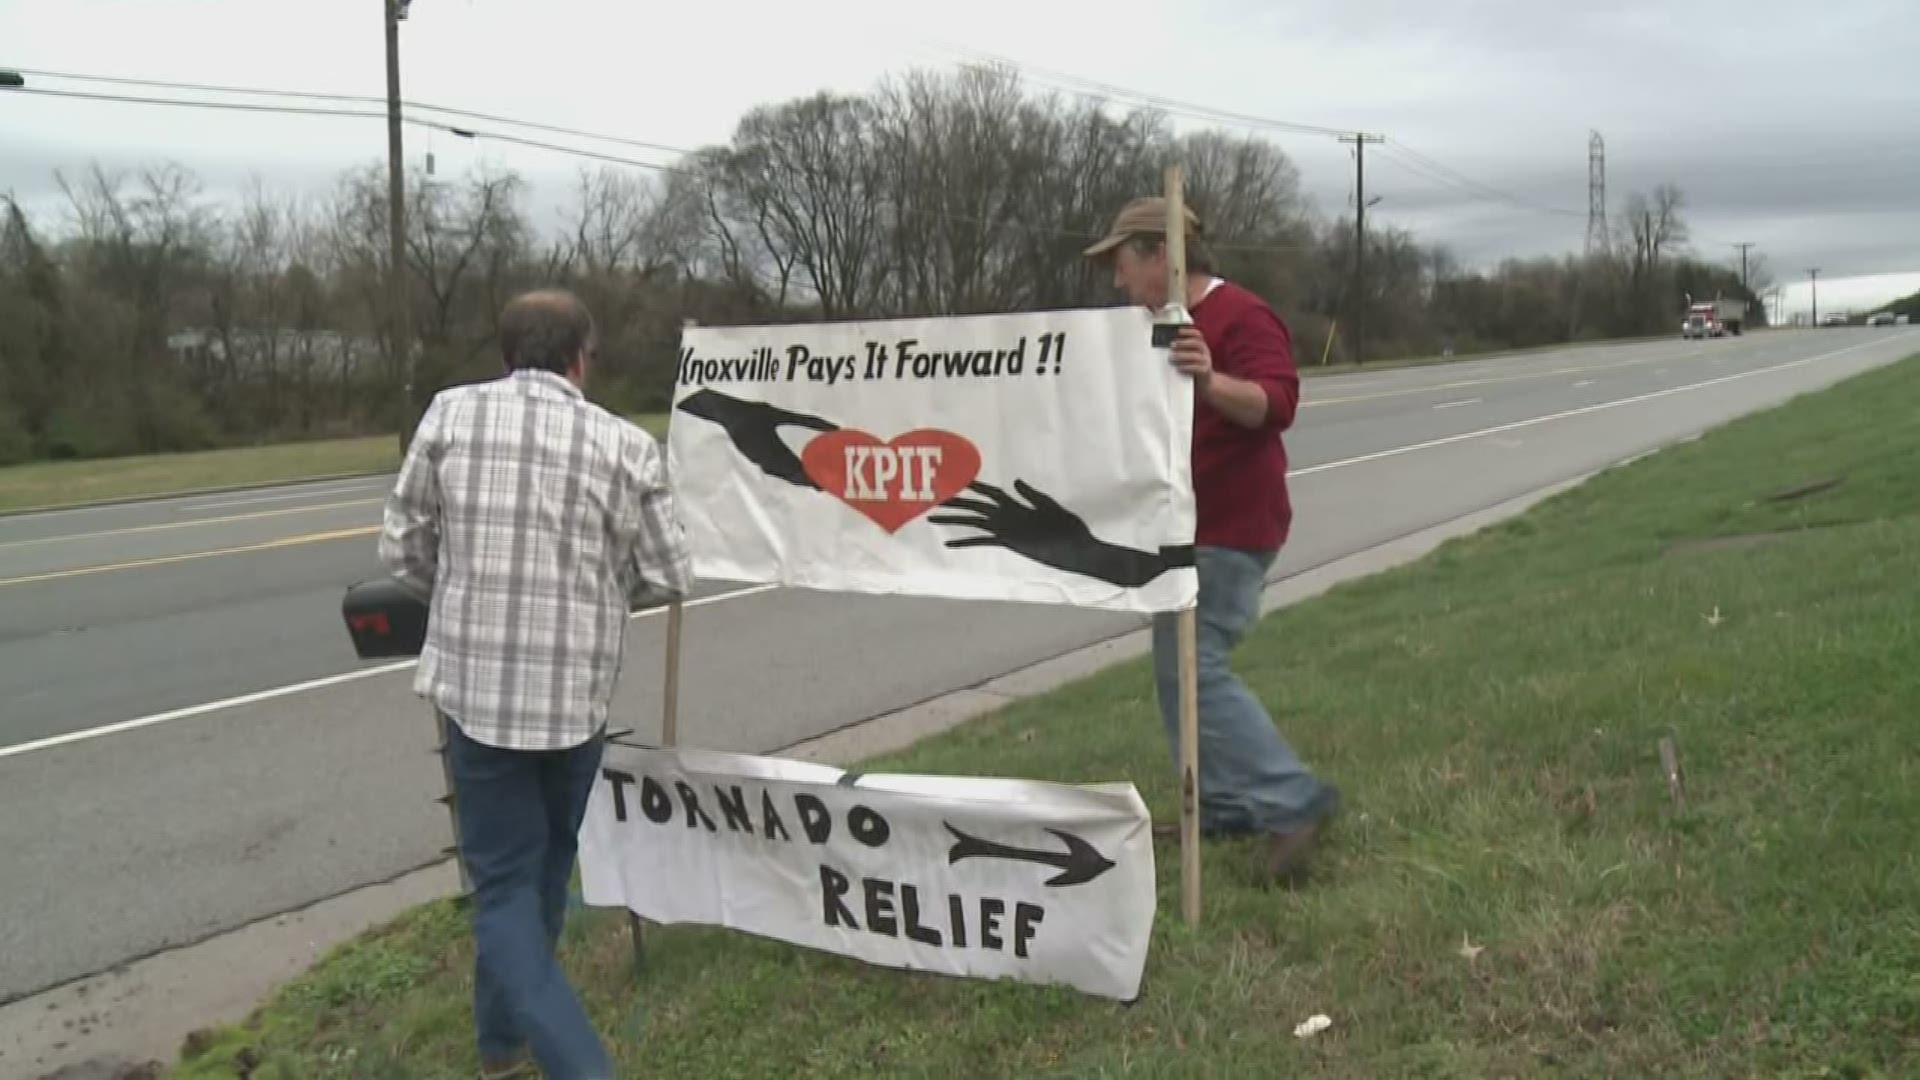 After deadly tornadoes in Middle Tennessee, people in East Tennessee are working to help.